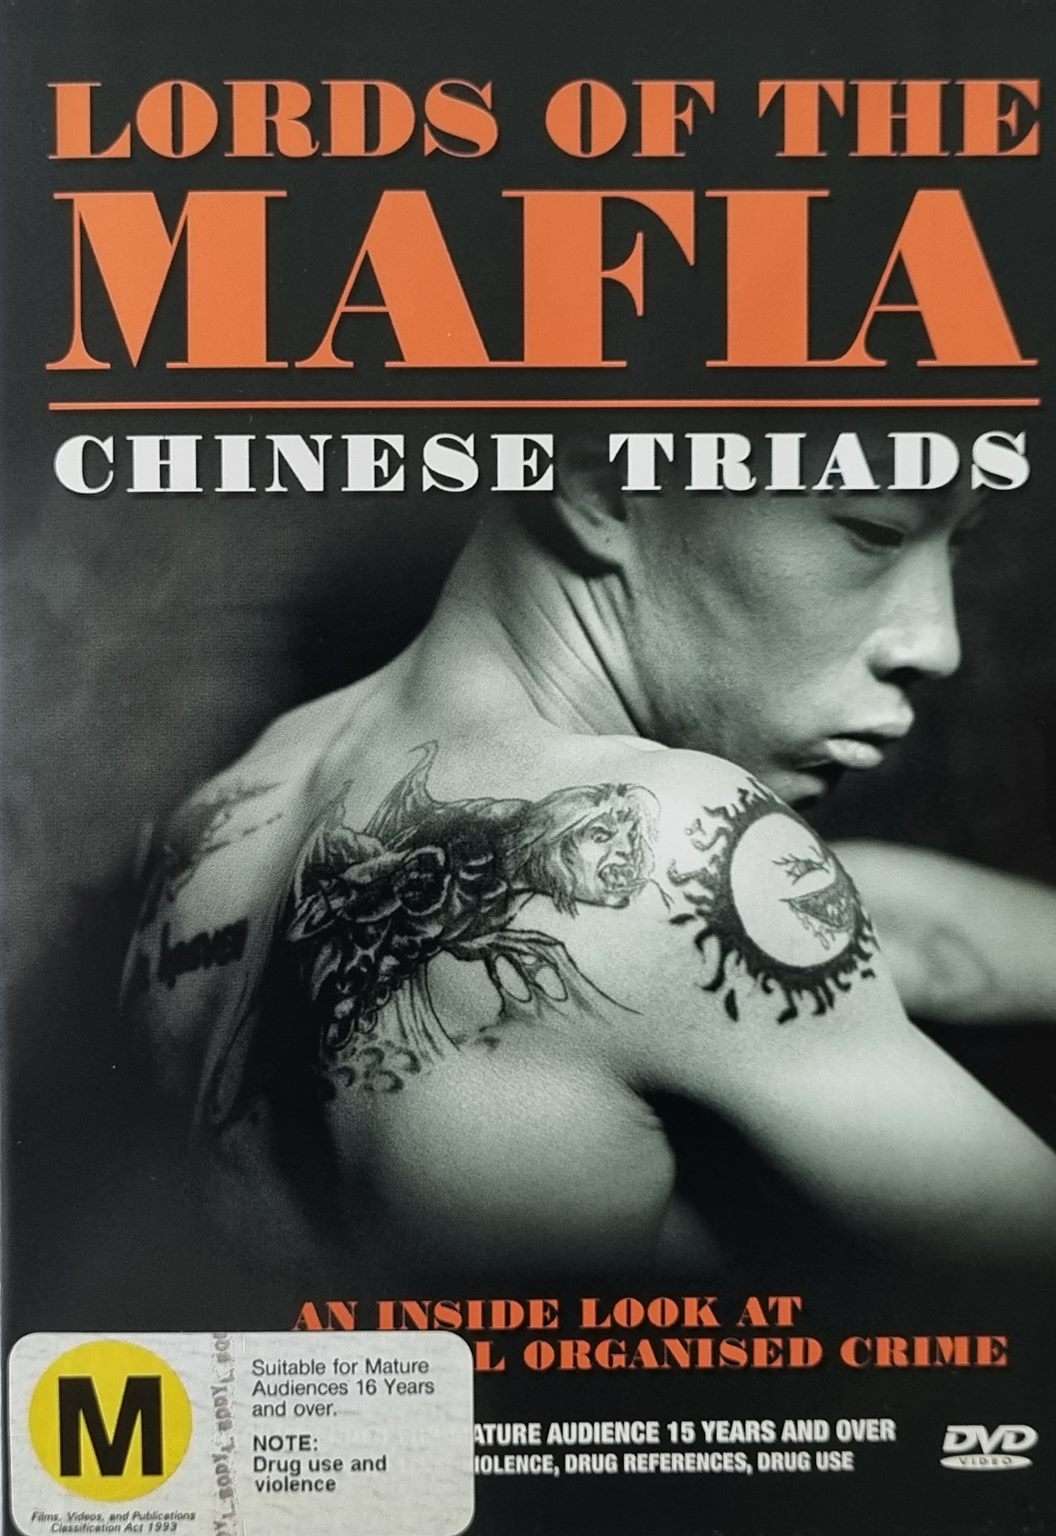 Lords of the Mafia - Chinese Triads